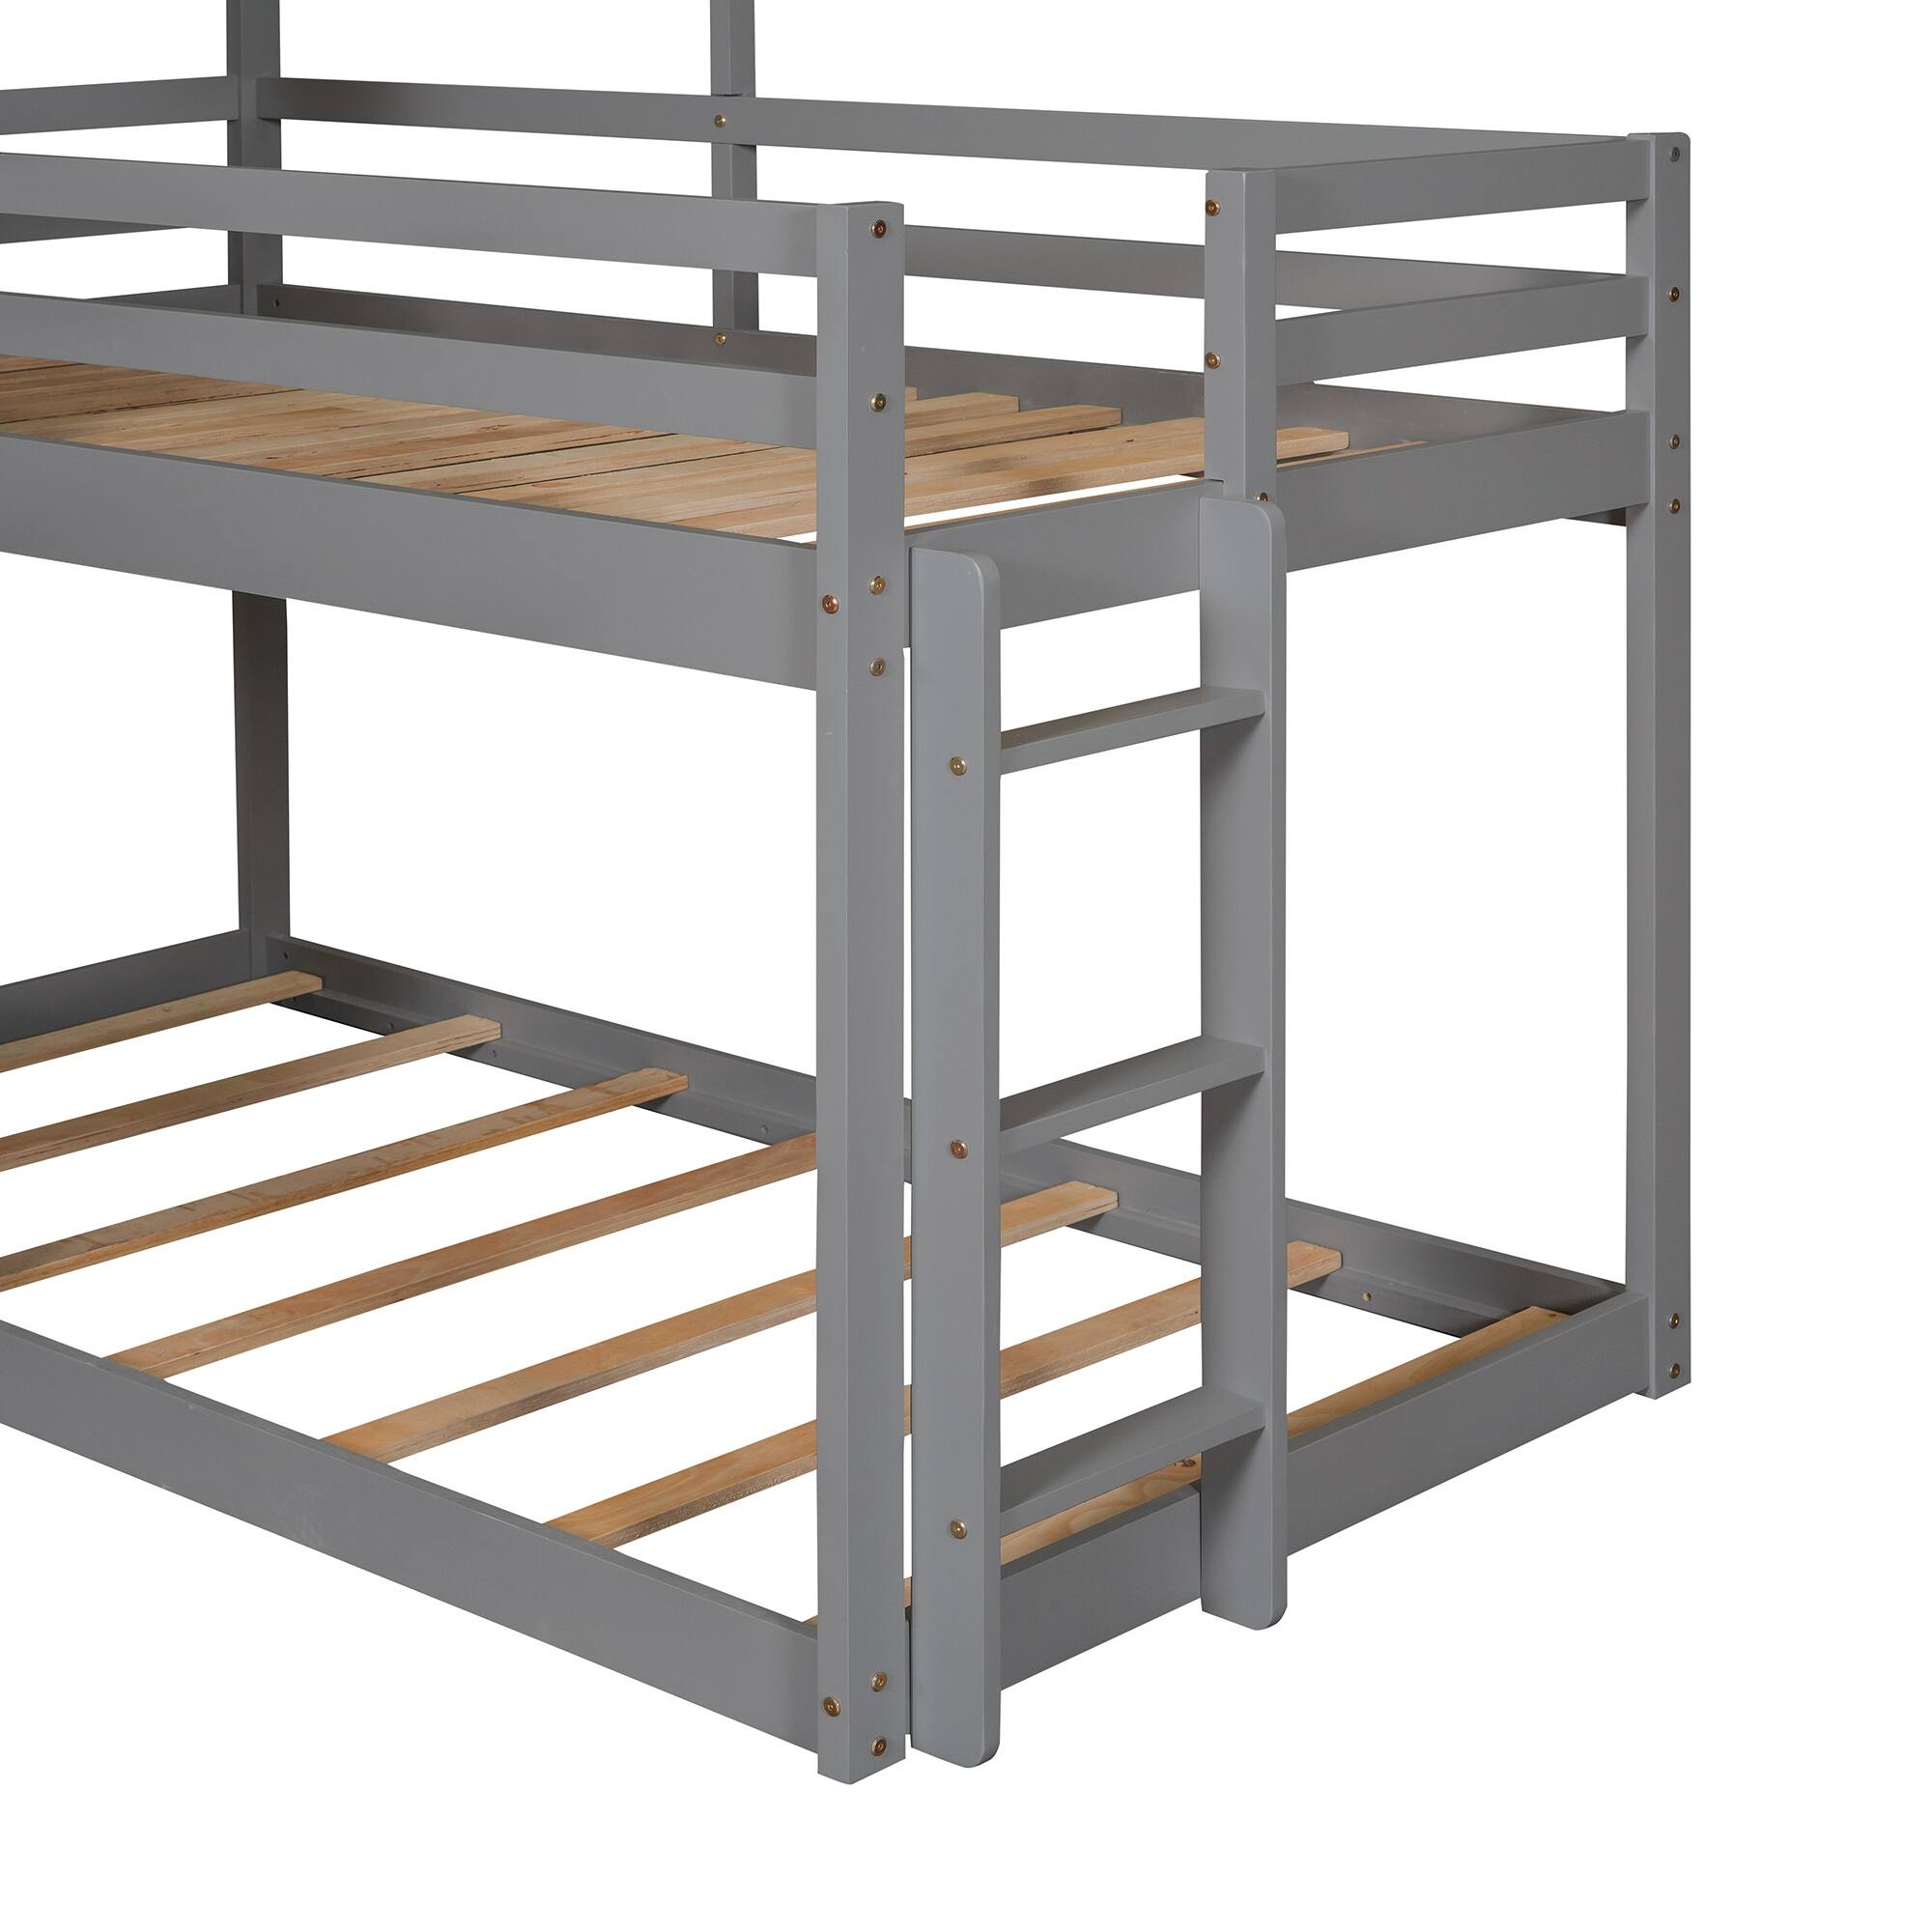 Full Wood Daybed with Table & Slat Support - Espresso